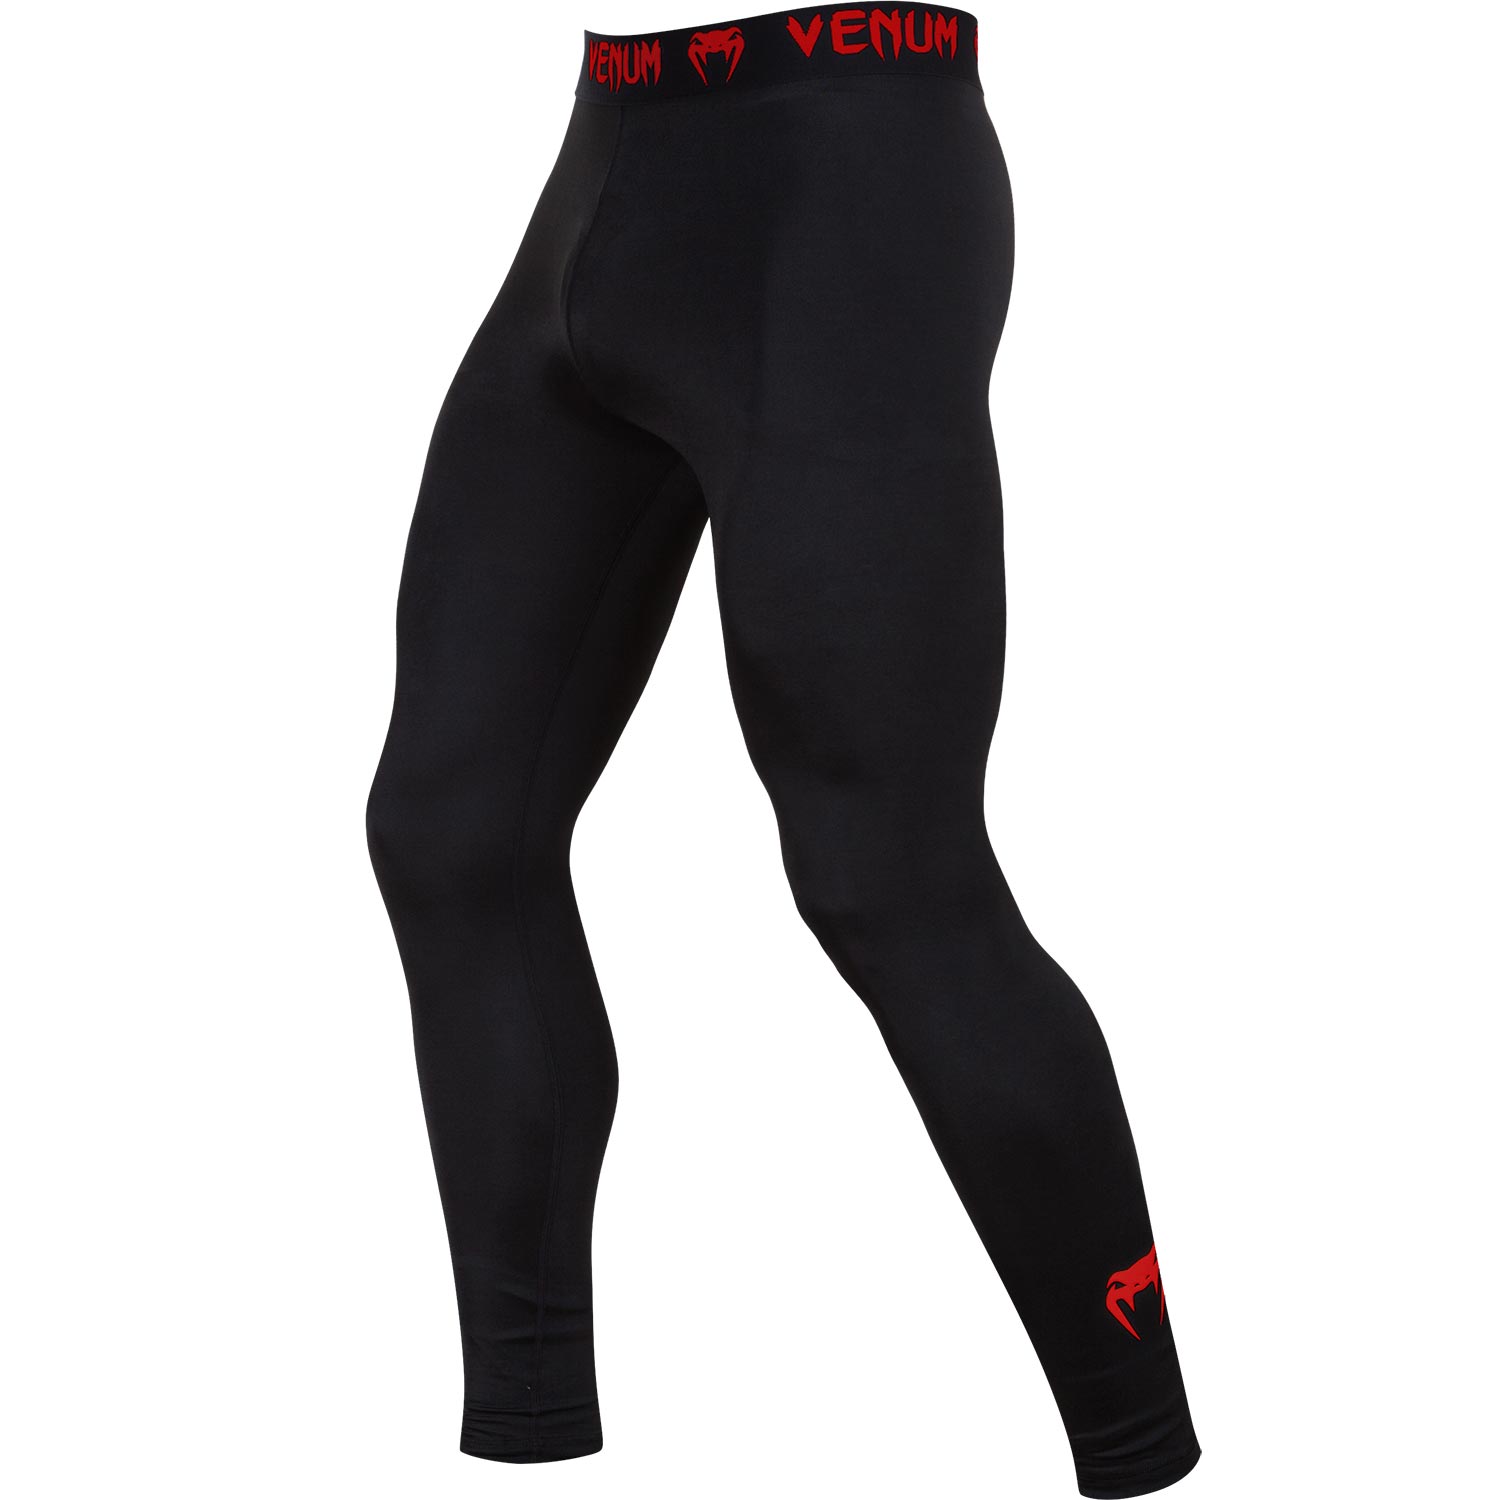 SPATS_CONTENDER_2_BLACK_RED_HD_04